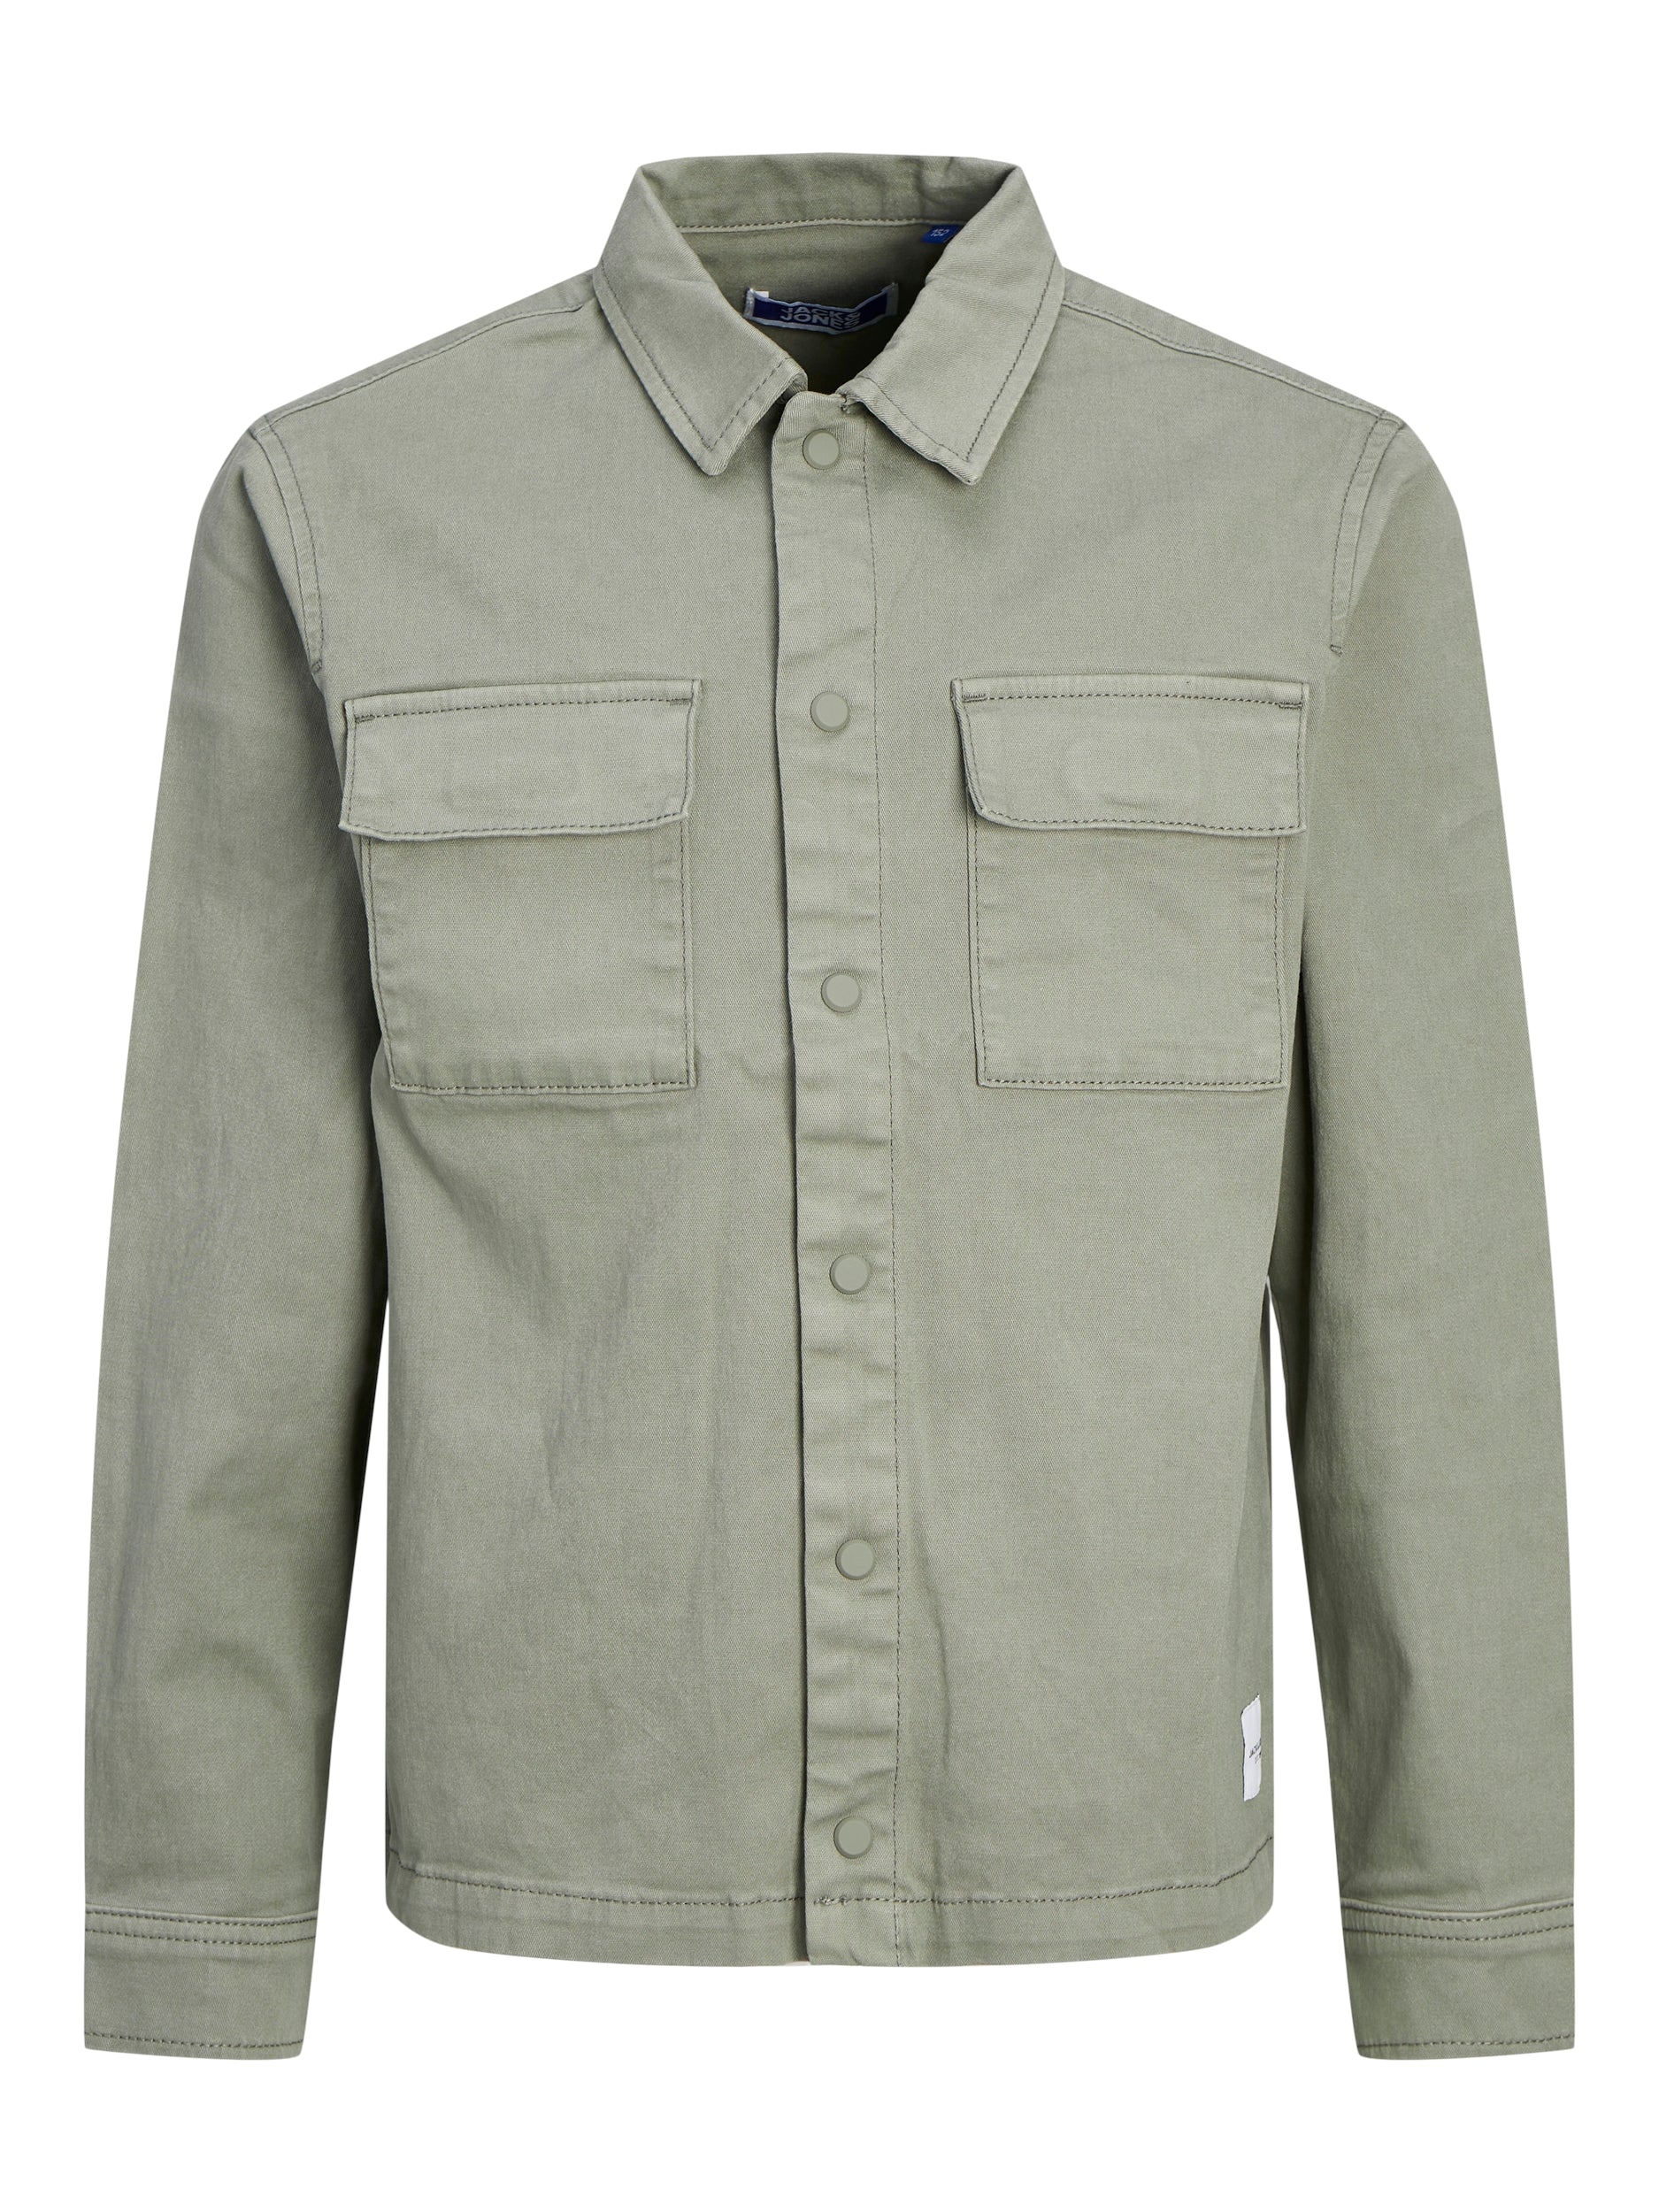 Boy's Eon Overshirt Long Sleeve Junior-Agave Green-Front View